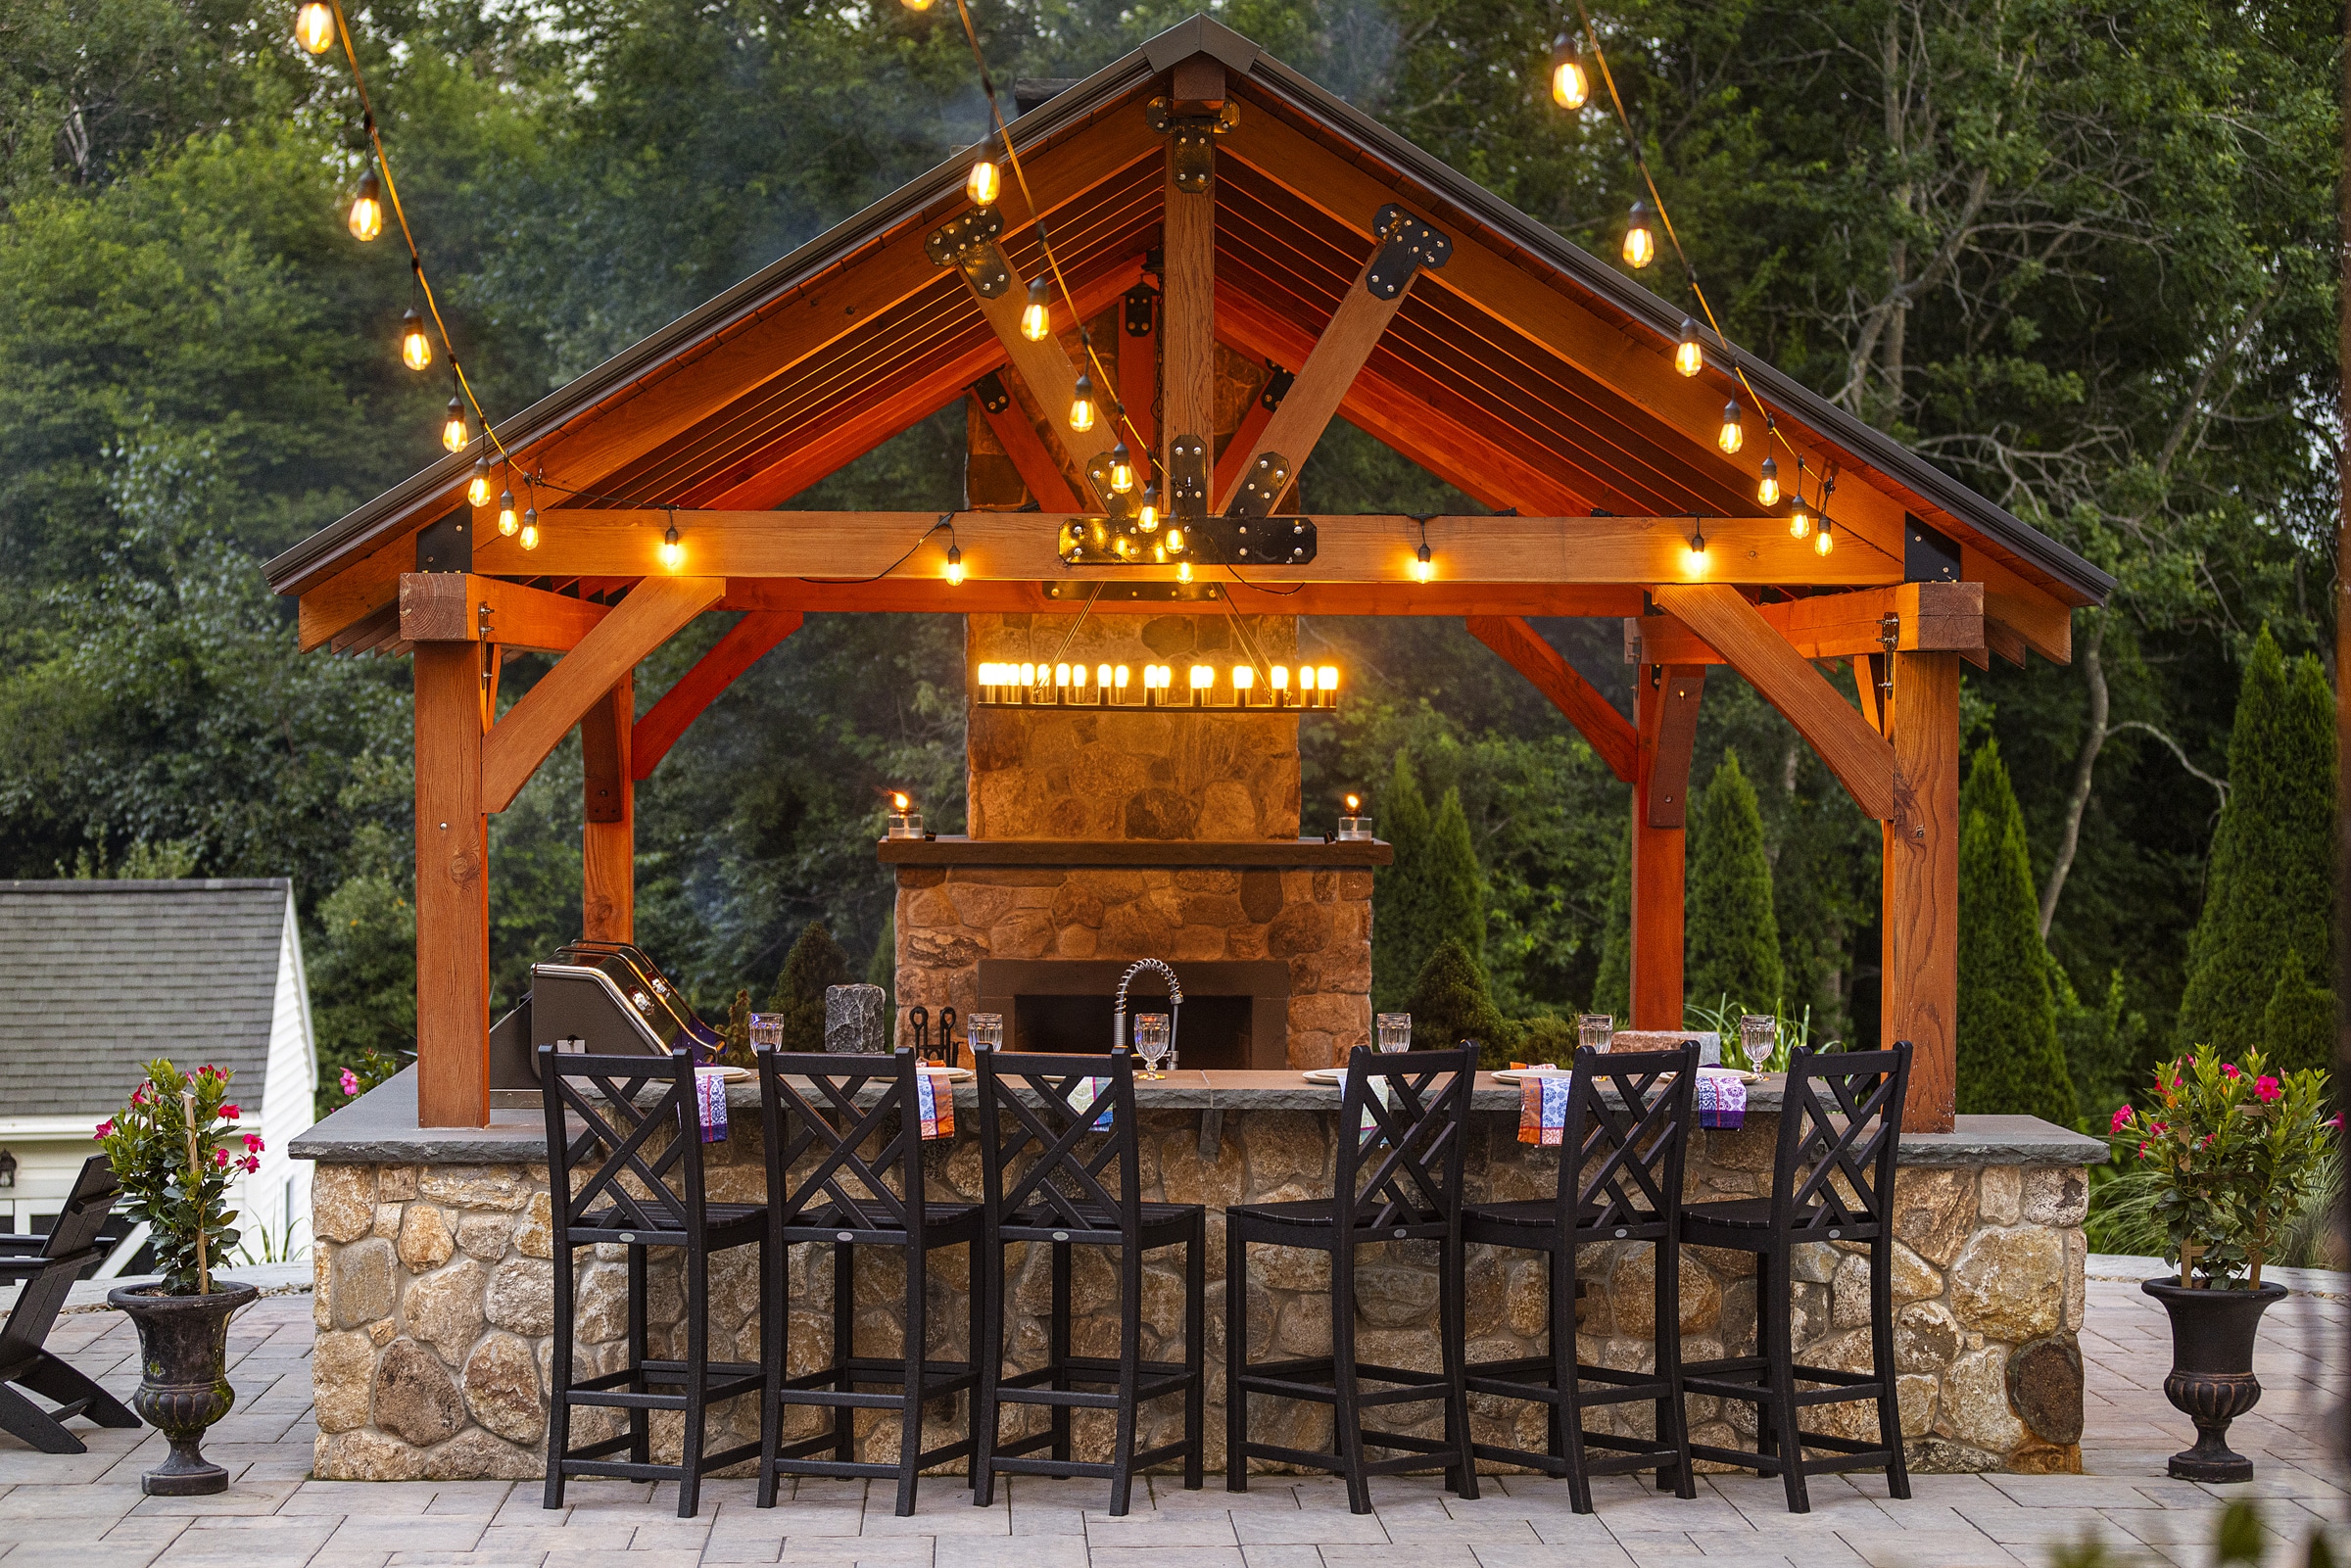 The outdoor dining bar under the pergola was adorned with New England Rounds stone veneer.